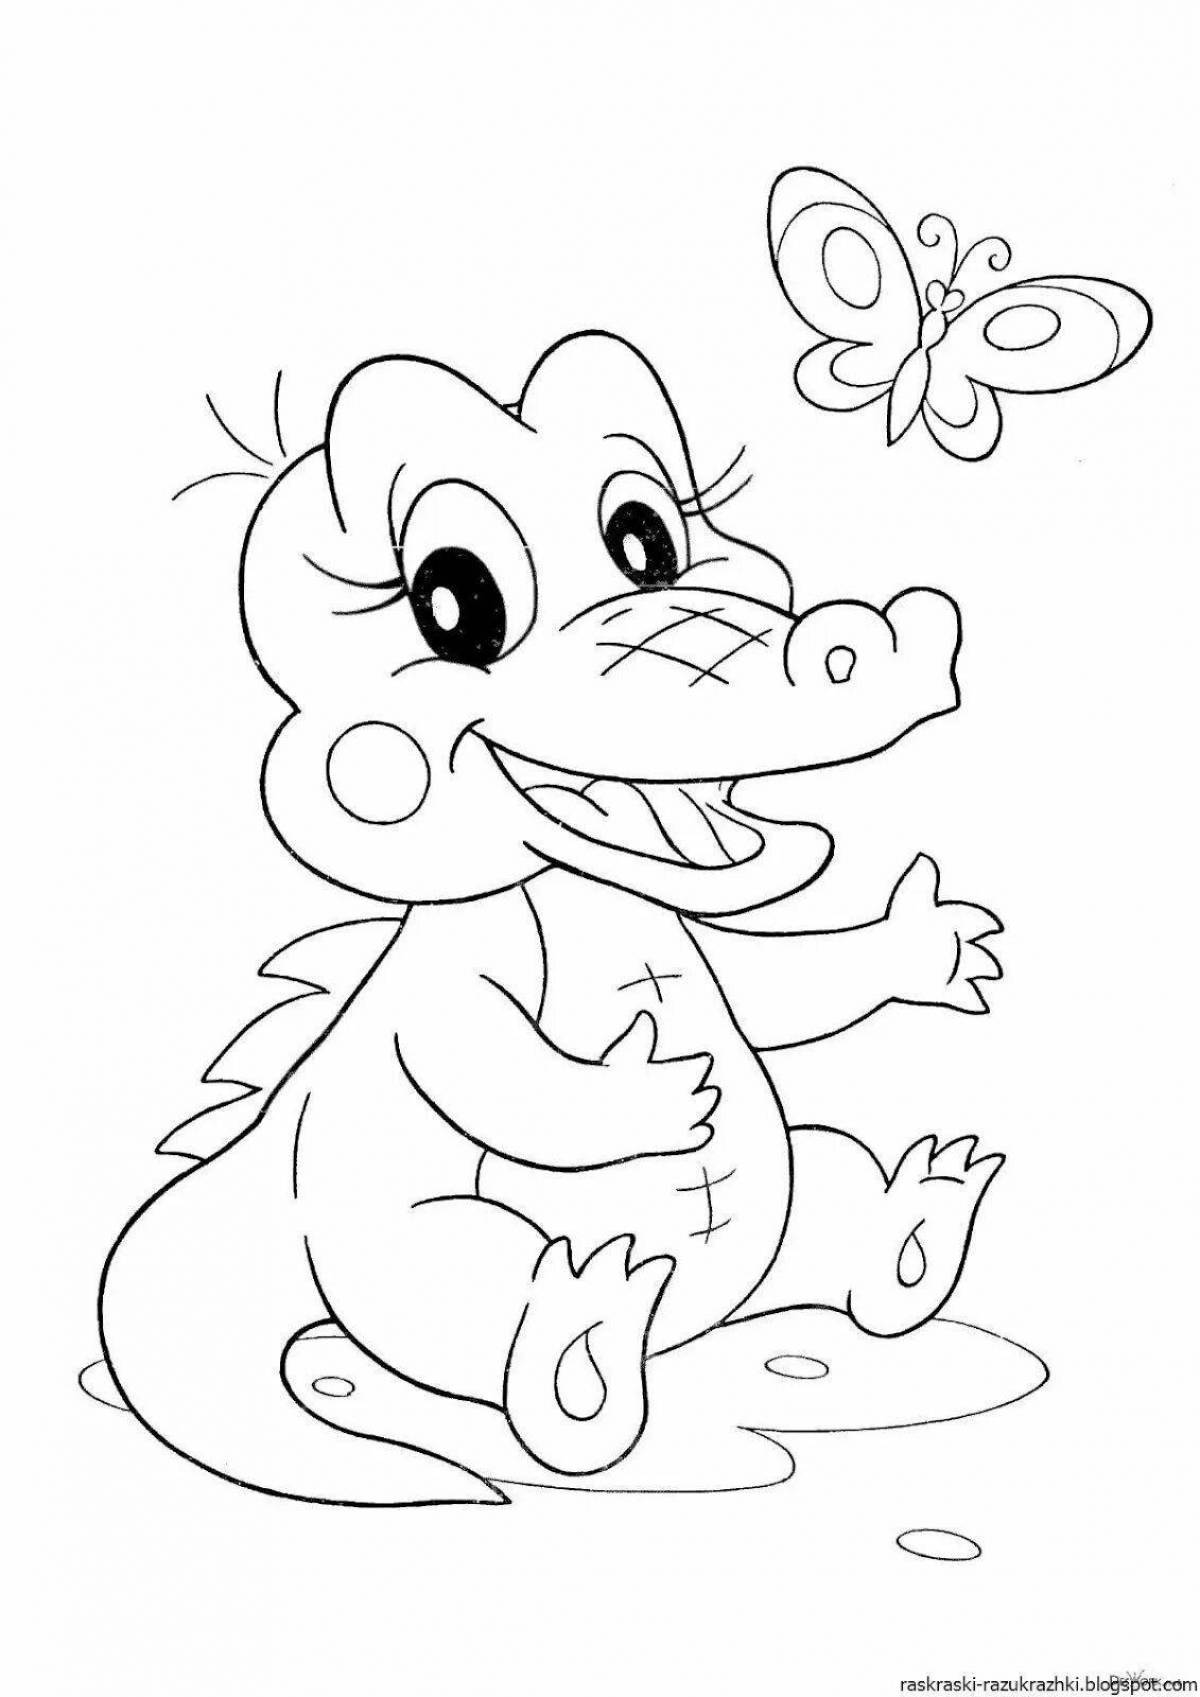 Adorable crocodile coloring book for 3-4 year olds